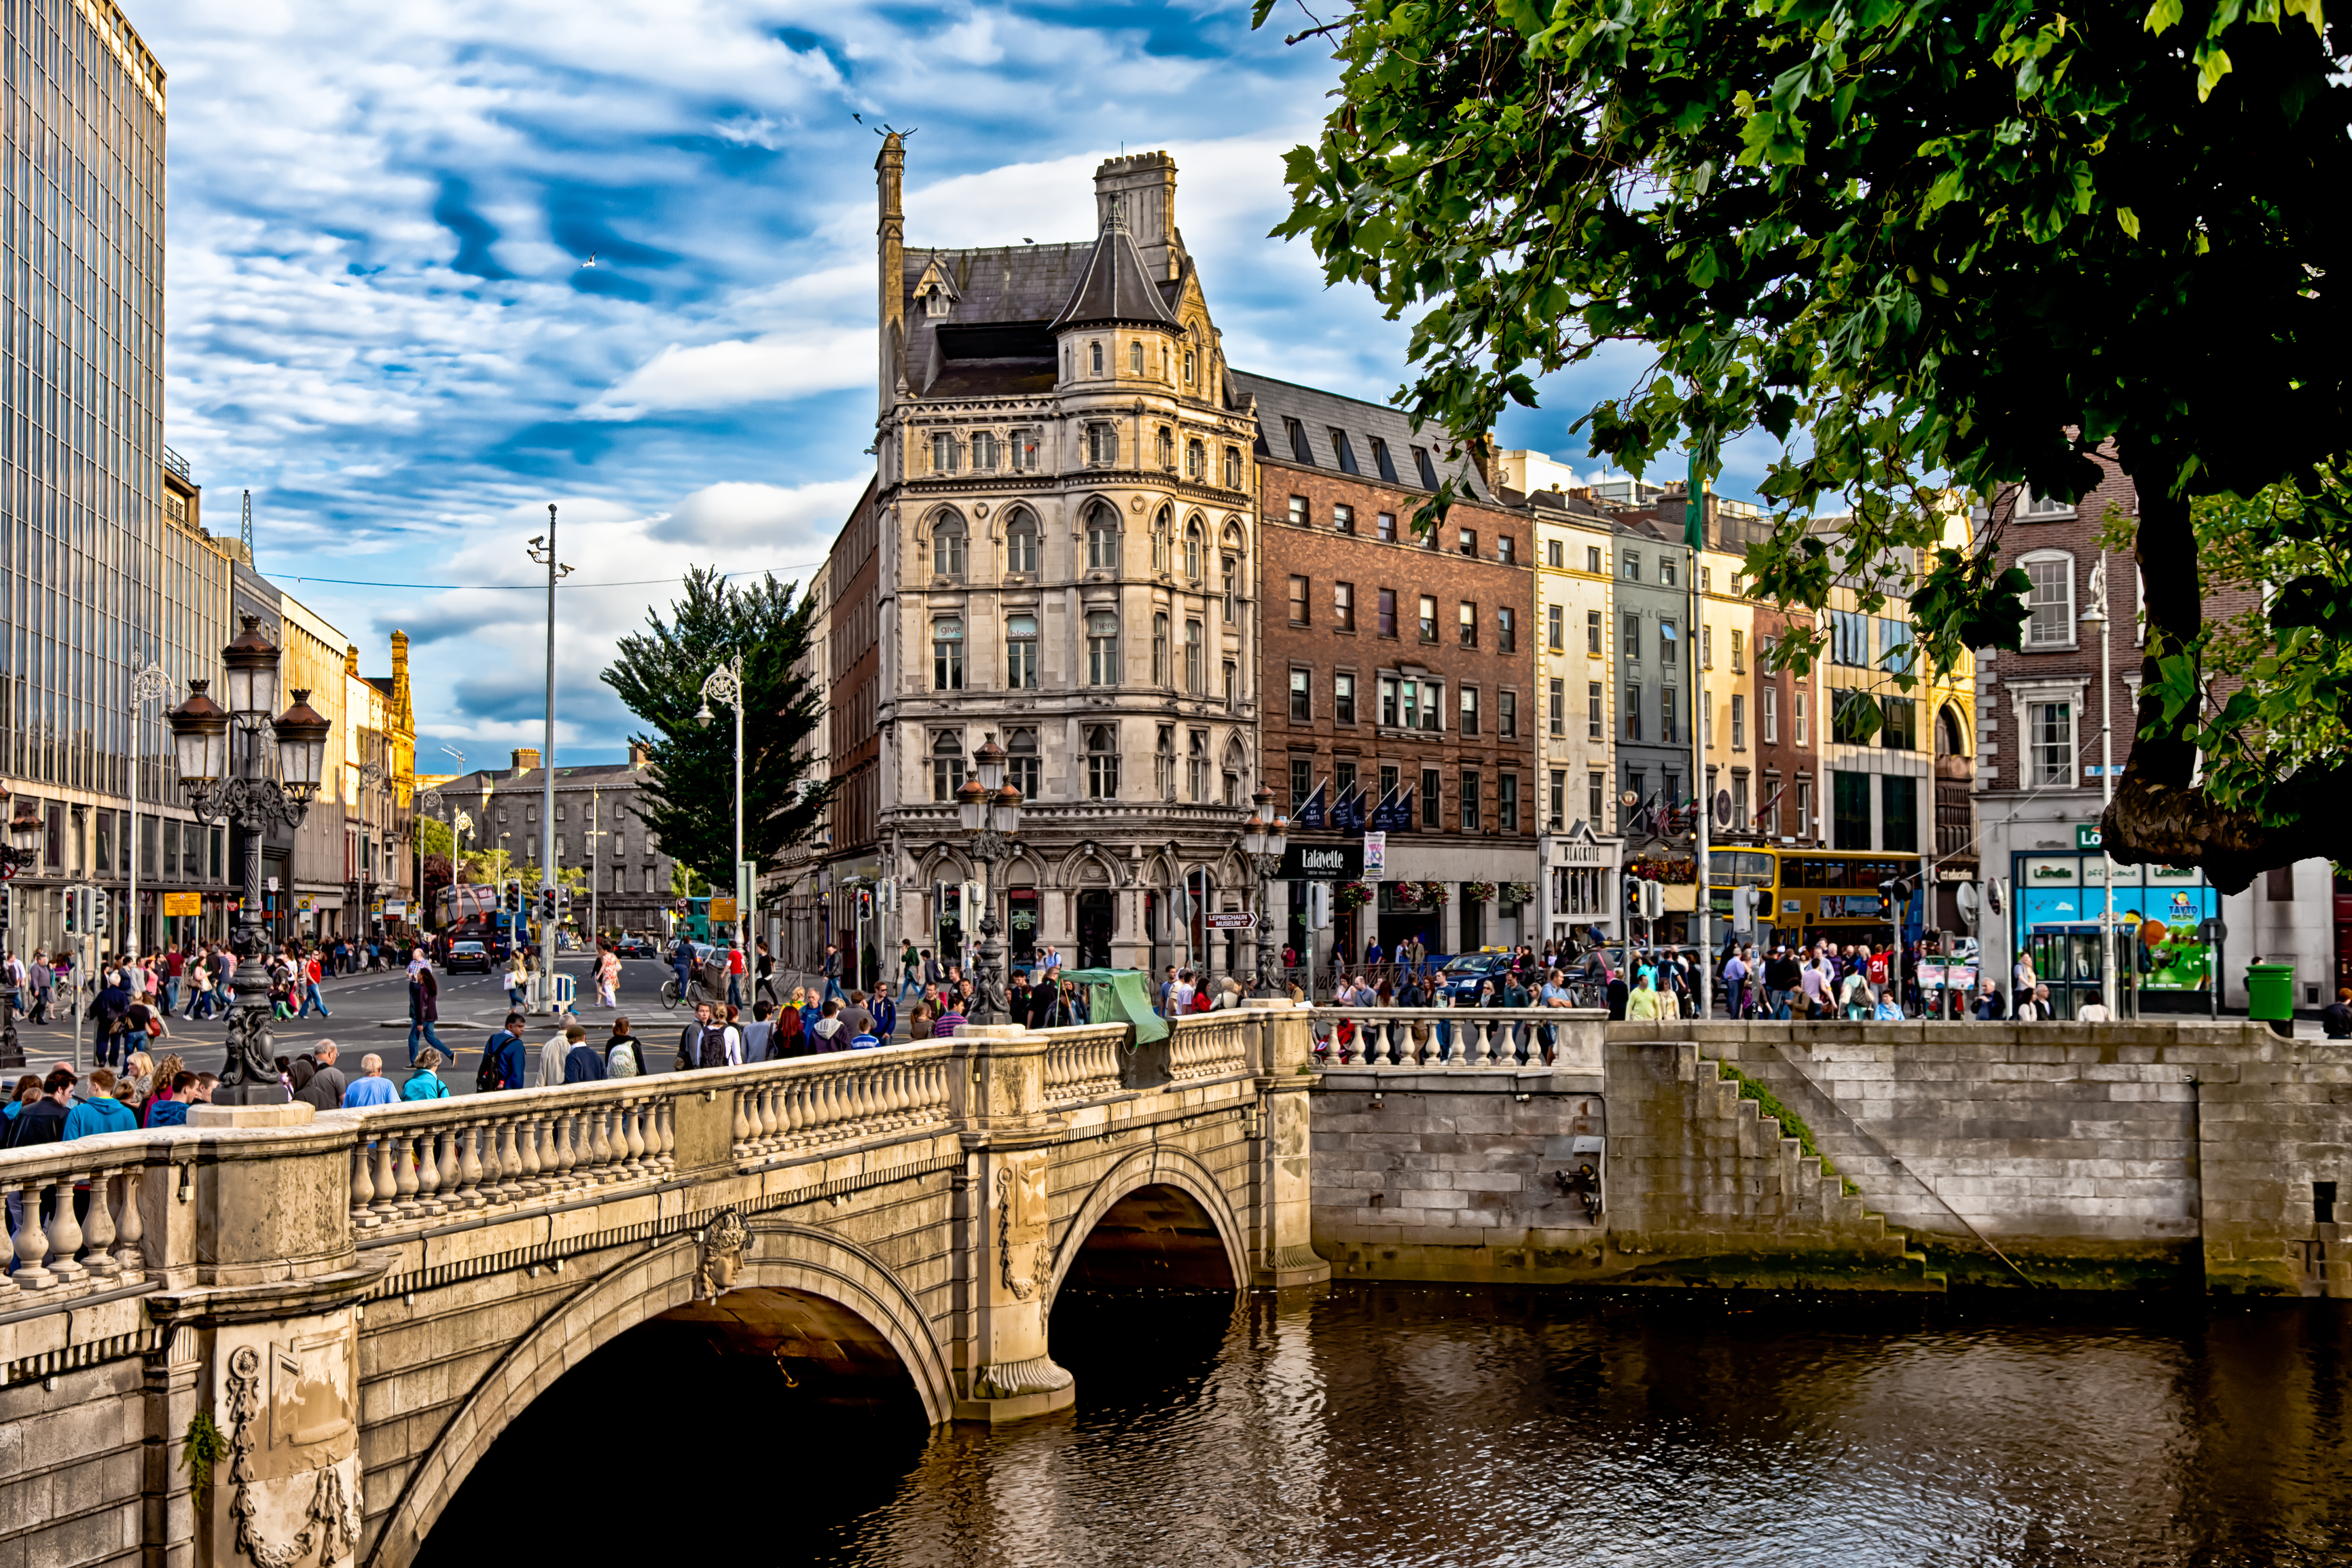 Fare Sale Fly from the US to Dublin  Ireland  for 350 